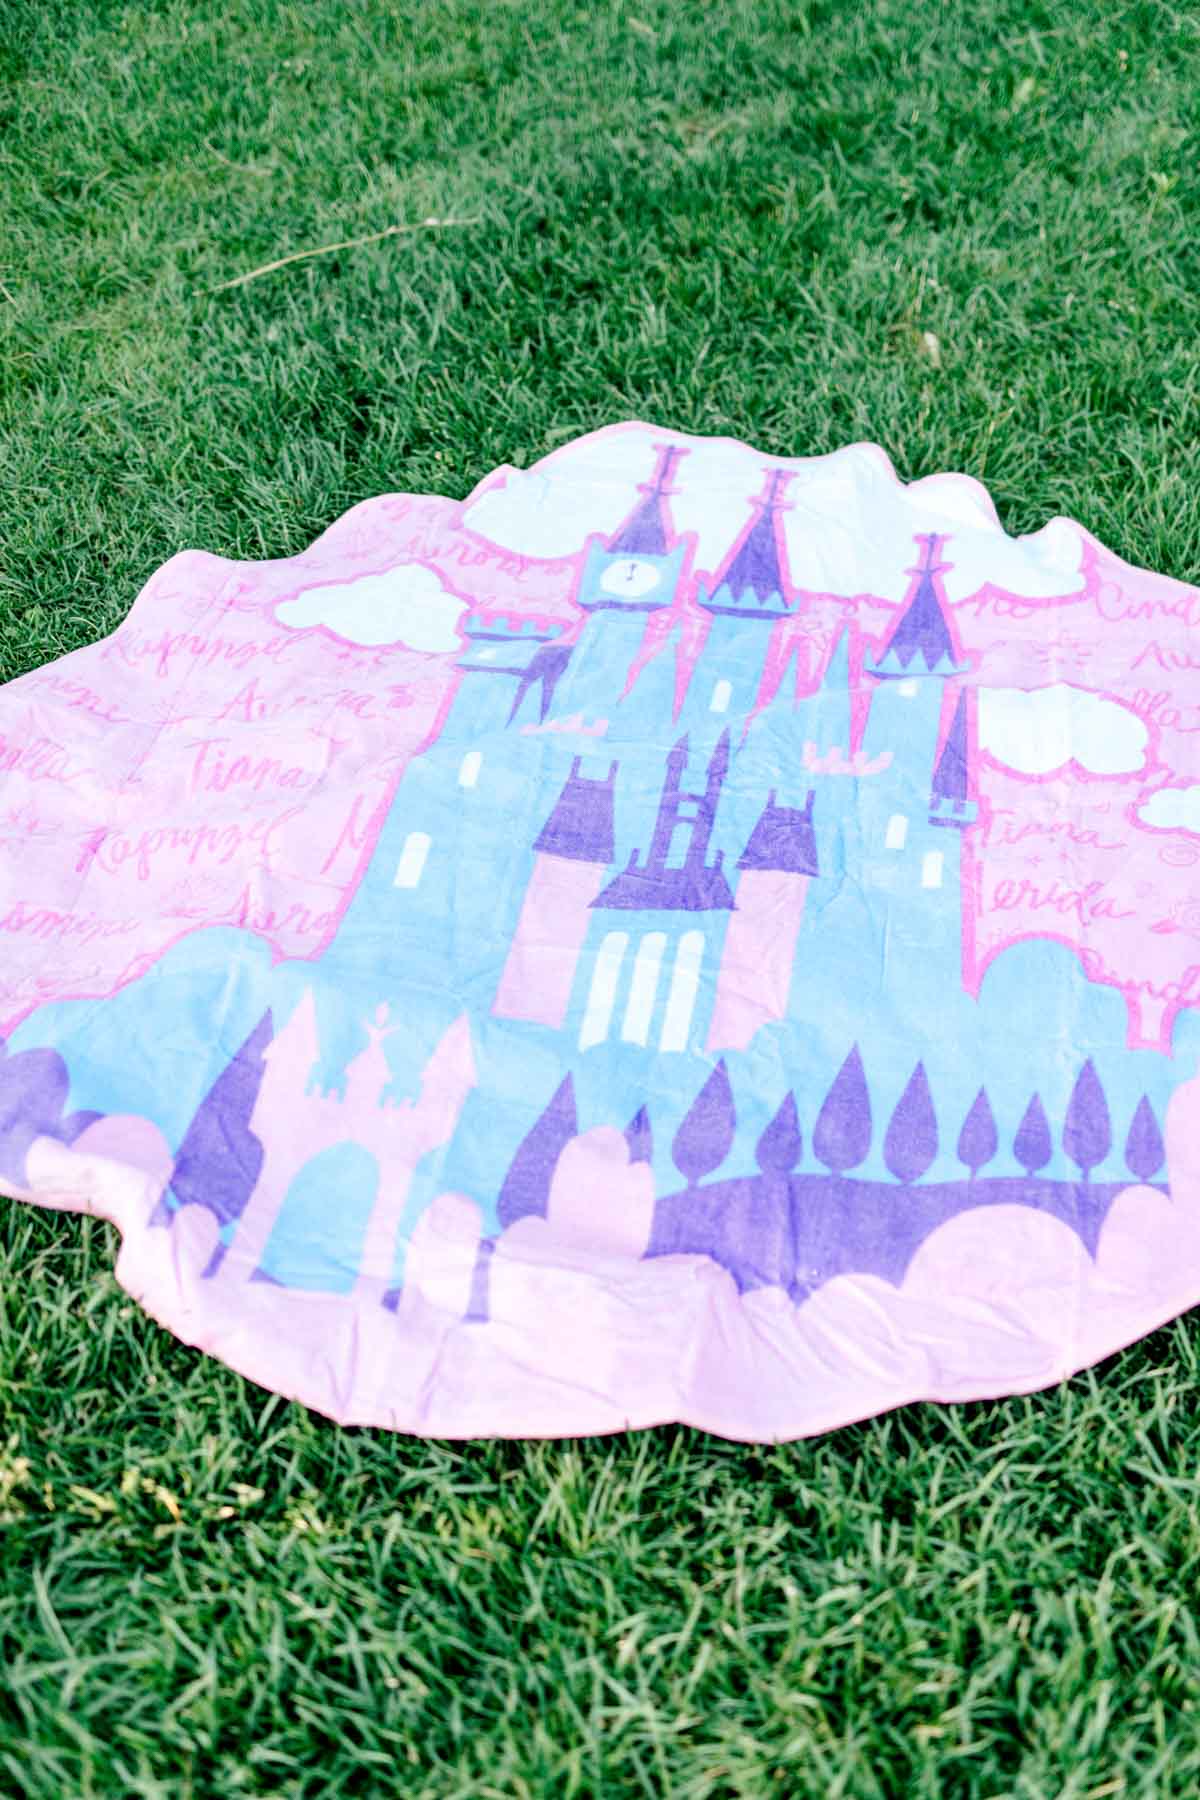 25 Perfect Princess Party Ideas all Princesses will Love - 19